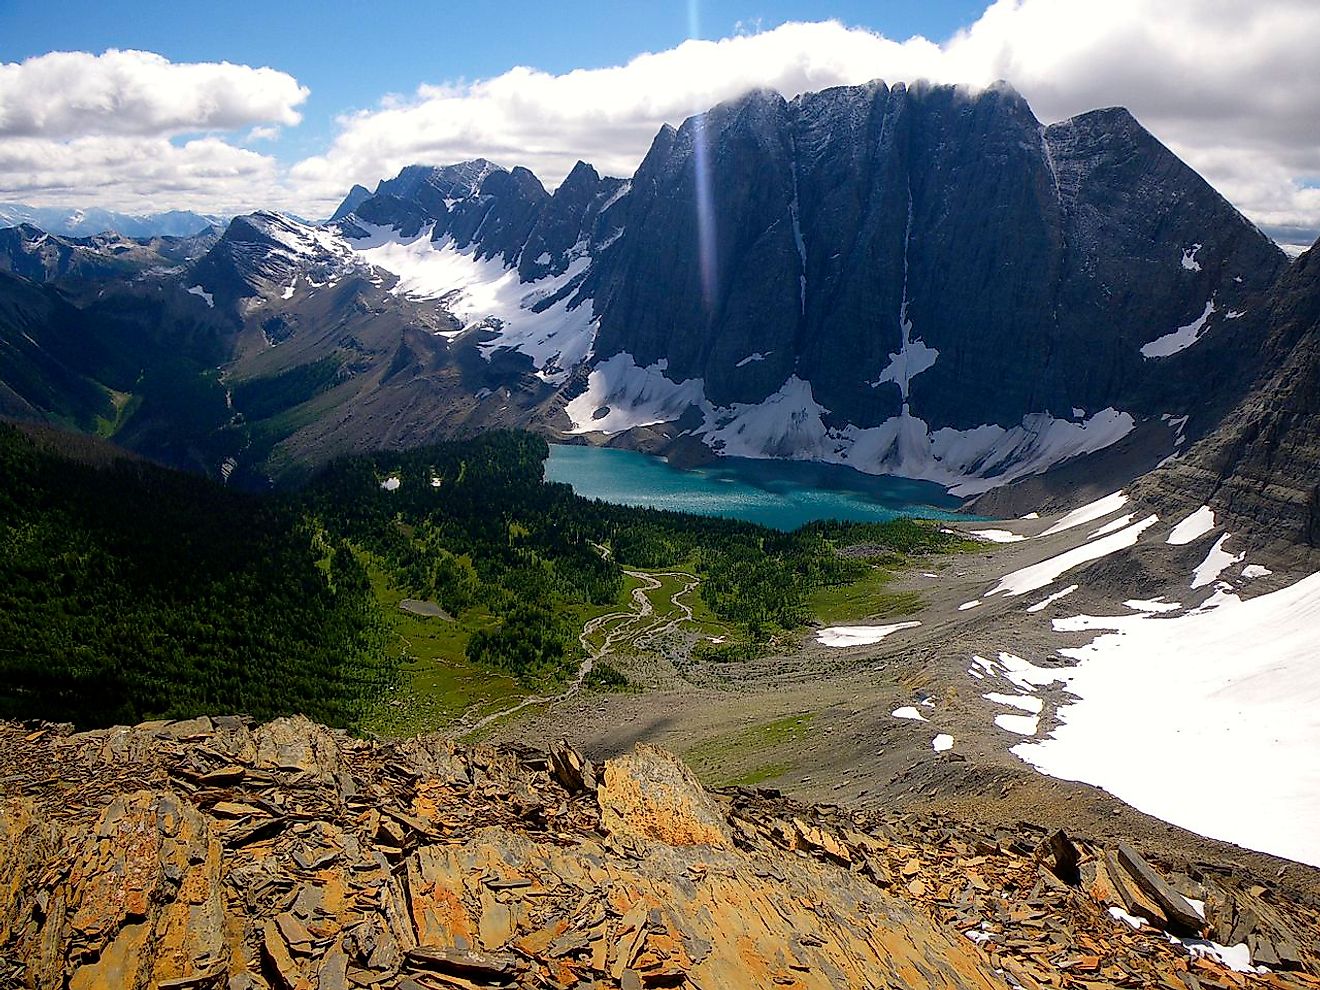 Floe Lake and the Rockwall as viewed from Numa Pass. Image credit: Christopher Fast/Wikimedia.org